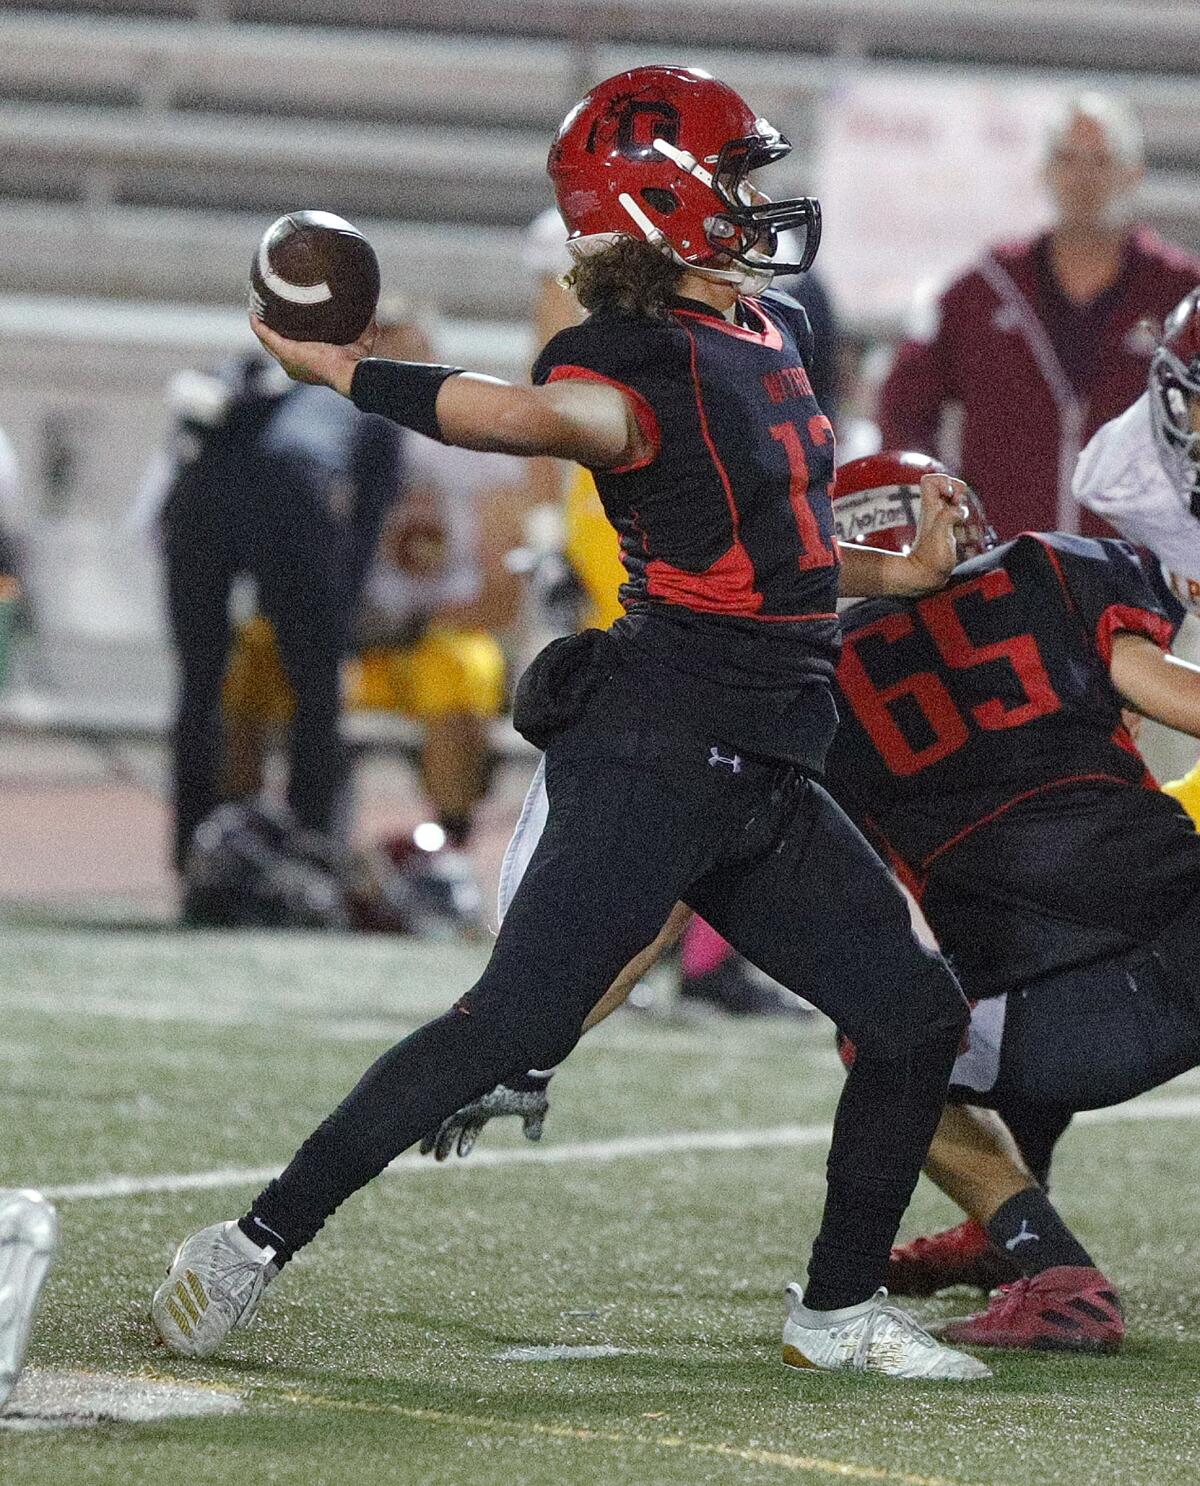 Glendale's quarterback Juan Estrada passes against Arcadia in a Pacific League football game at Glendale High School on Thursday, October 3, 2019.